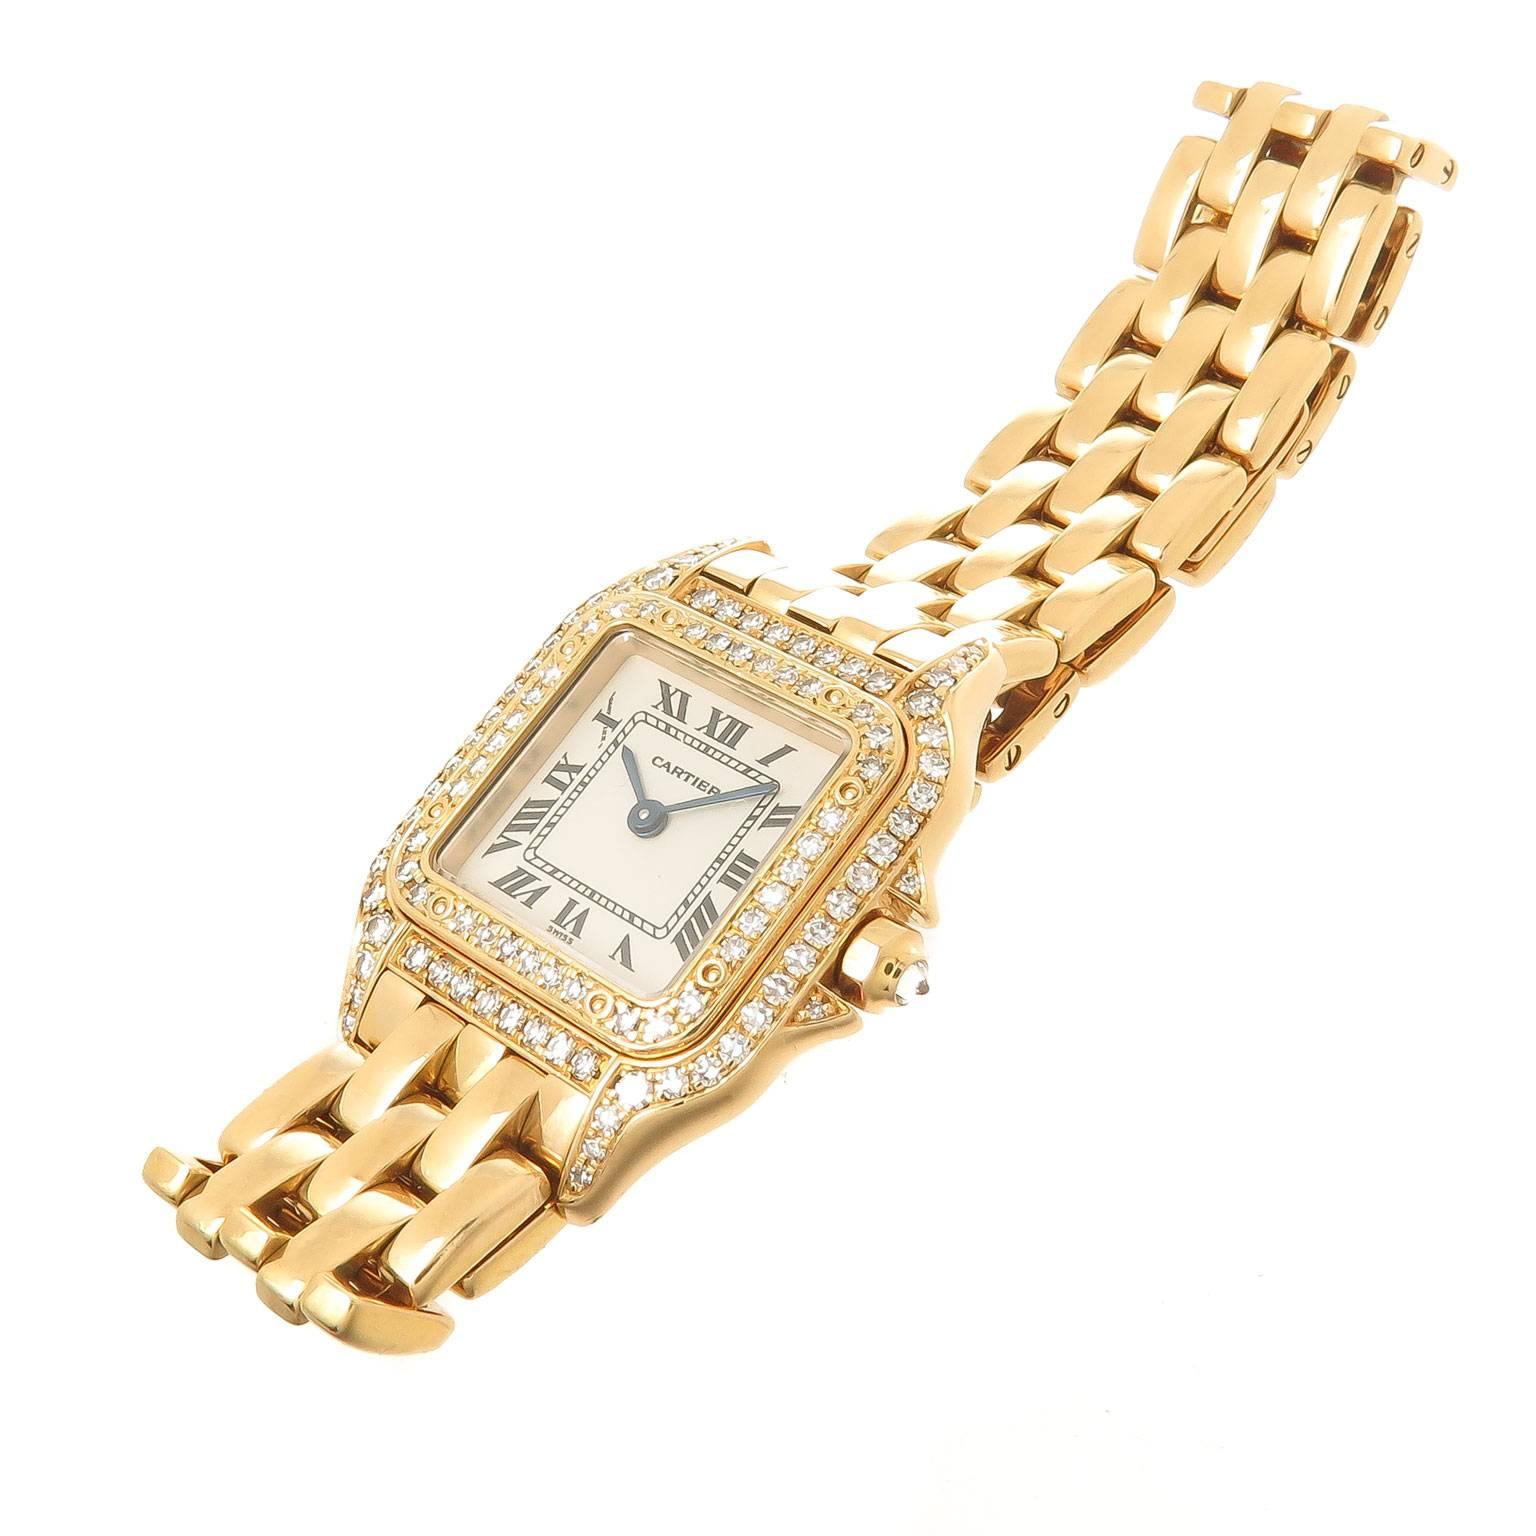 Circa 1990s Cartier Ladies Panther Wrist watch, 29 X 21 MM 18K yellow Gold Water resistant case. Diamond set Case and Bezel totaling 1.60 carat.  Quartz movement, White Dial with Black Roman Numerals, scratch resistant crystal and a Diamond Set